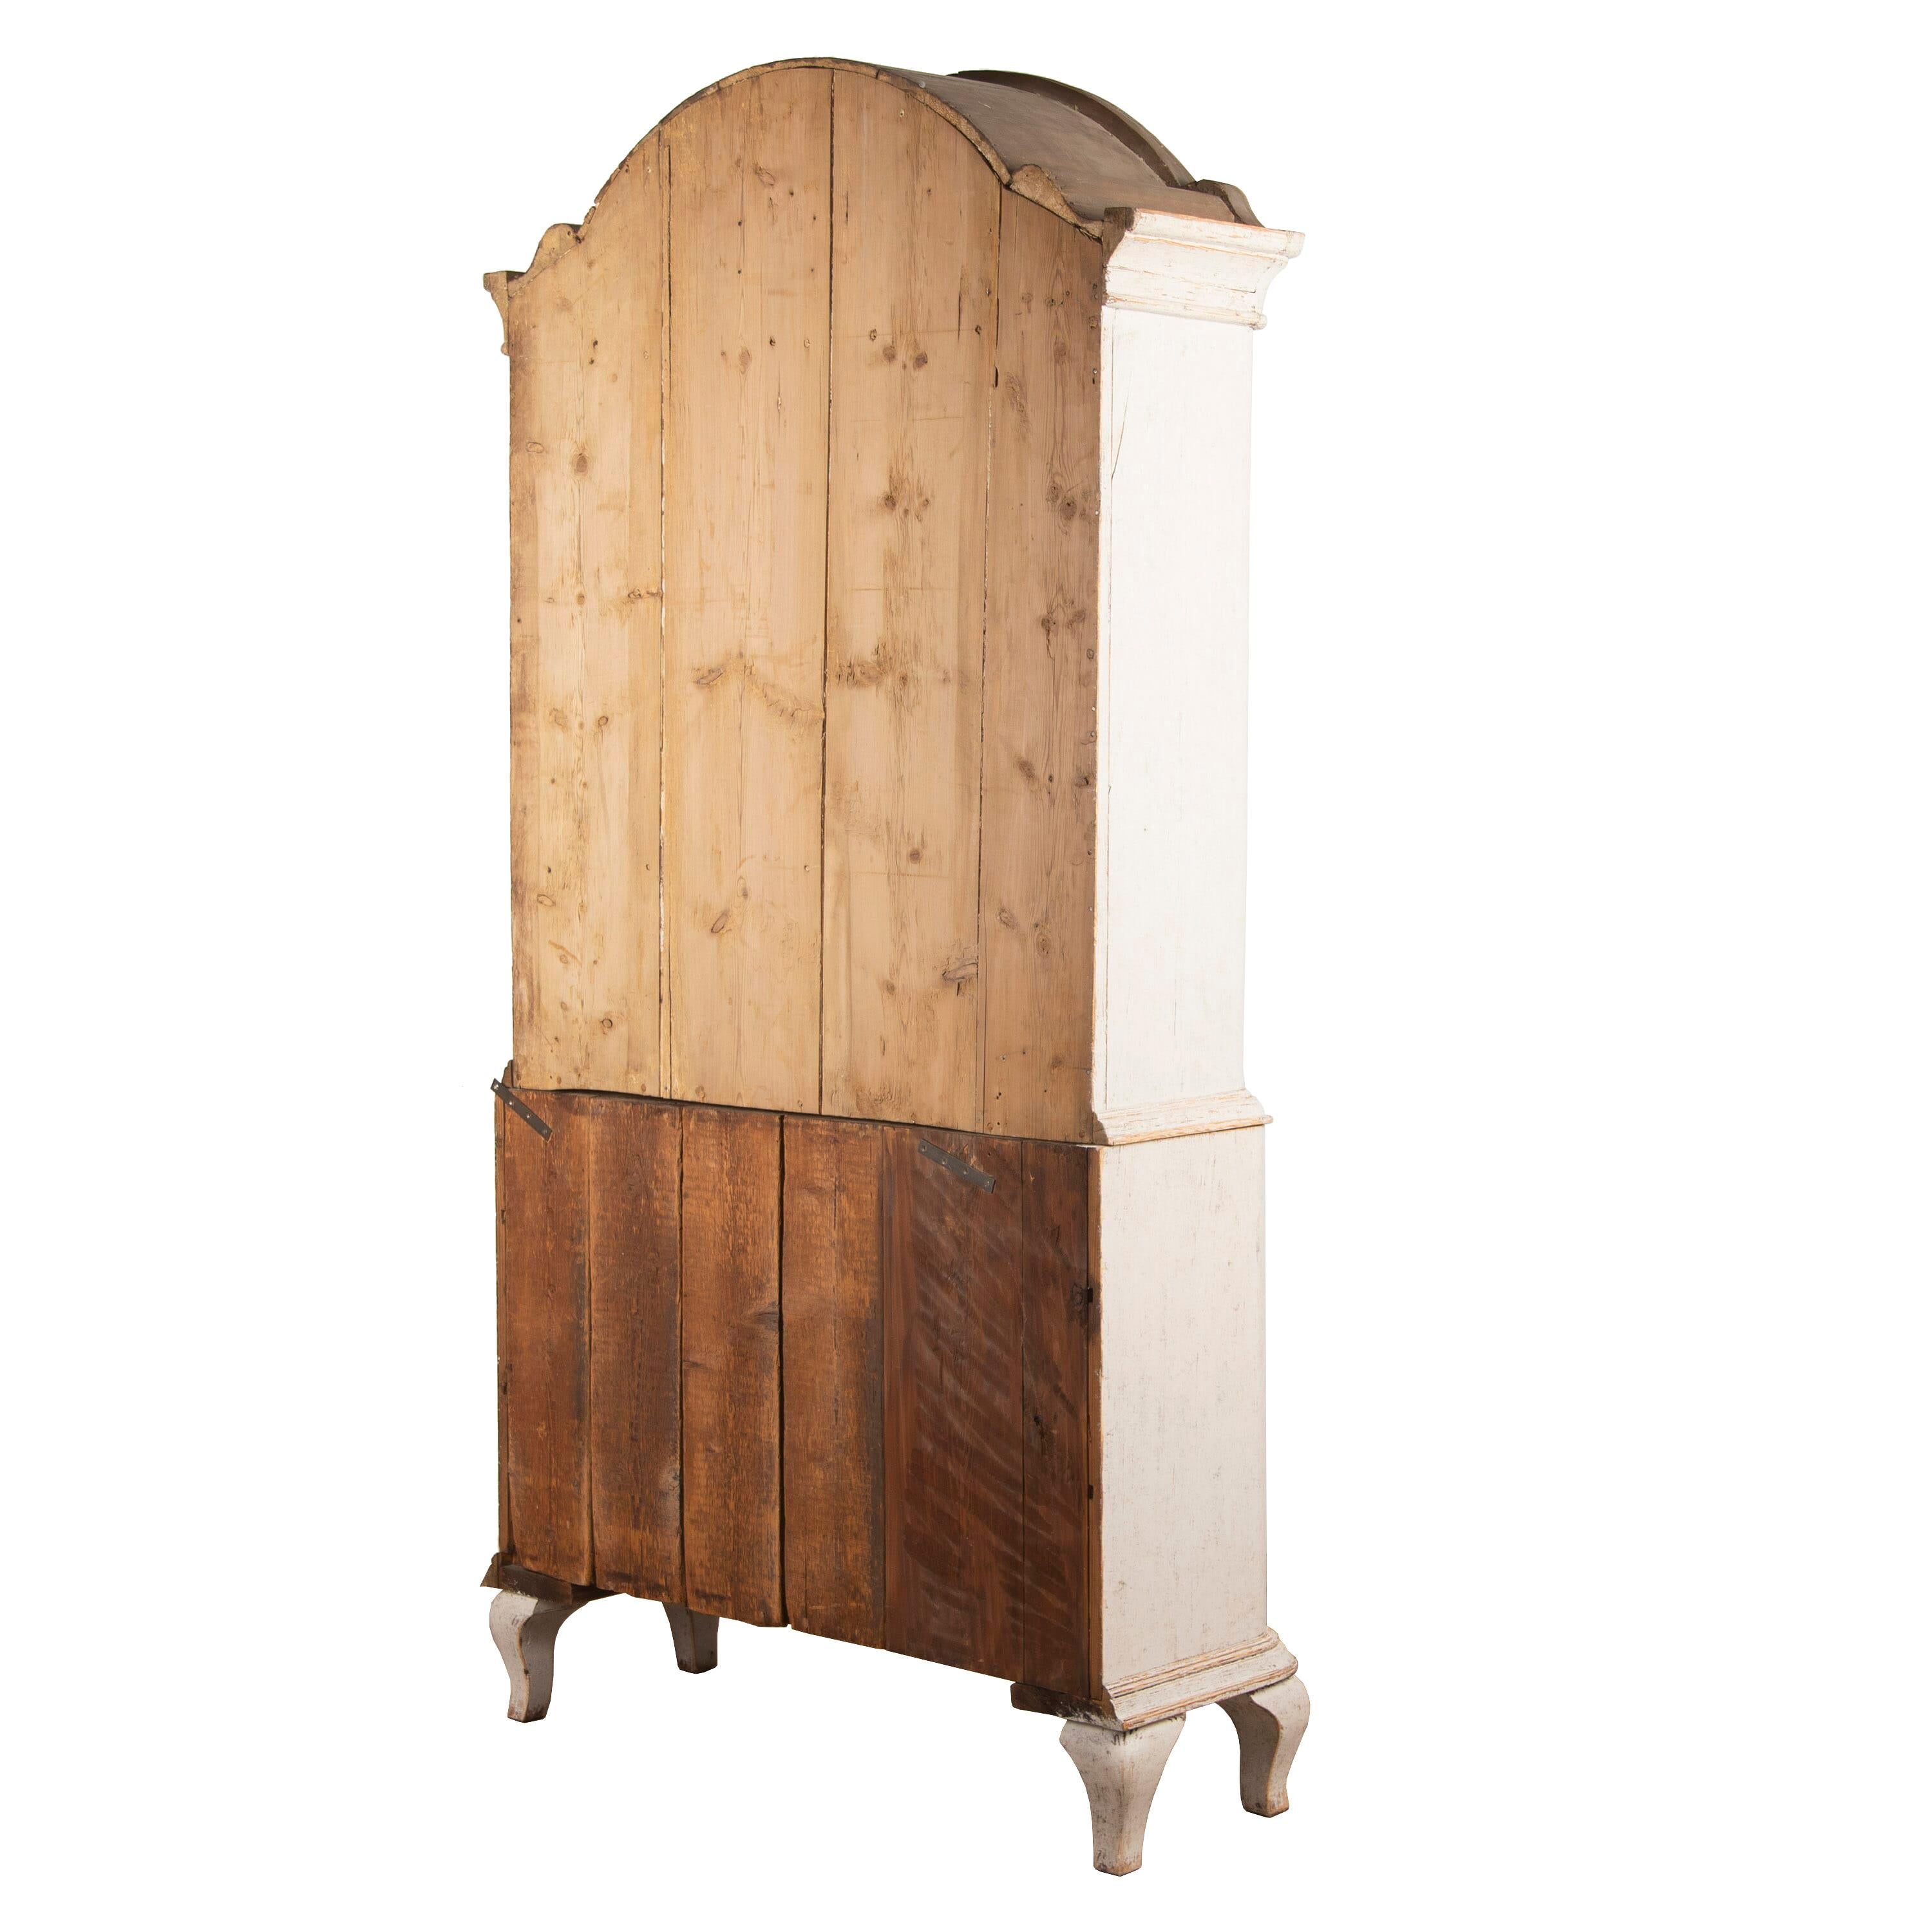 A period Rococo cabinet from the area of Jamtland, Sweden with a deep arch carved pediment. Two doors with decorative beading to the doors open to useful storage, below there are two short and two further long drawers. This piece has been repainted